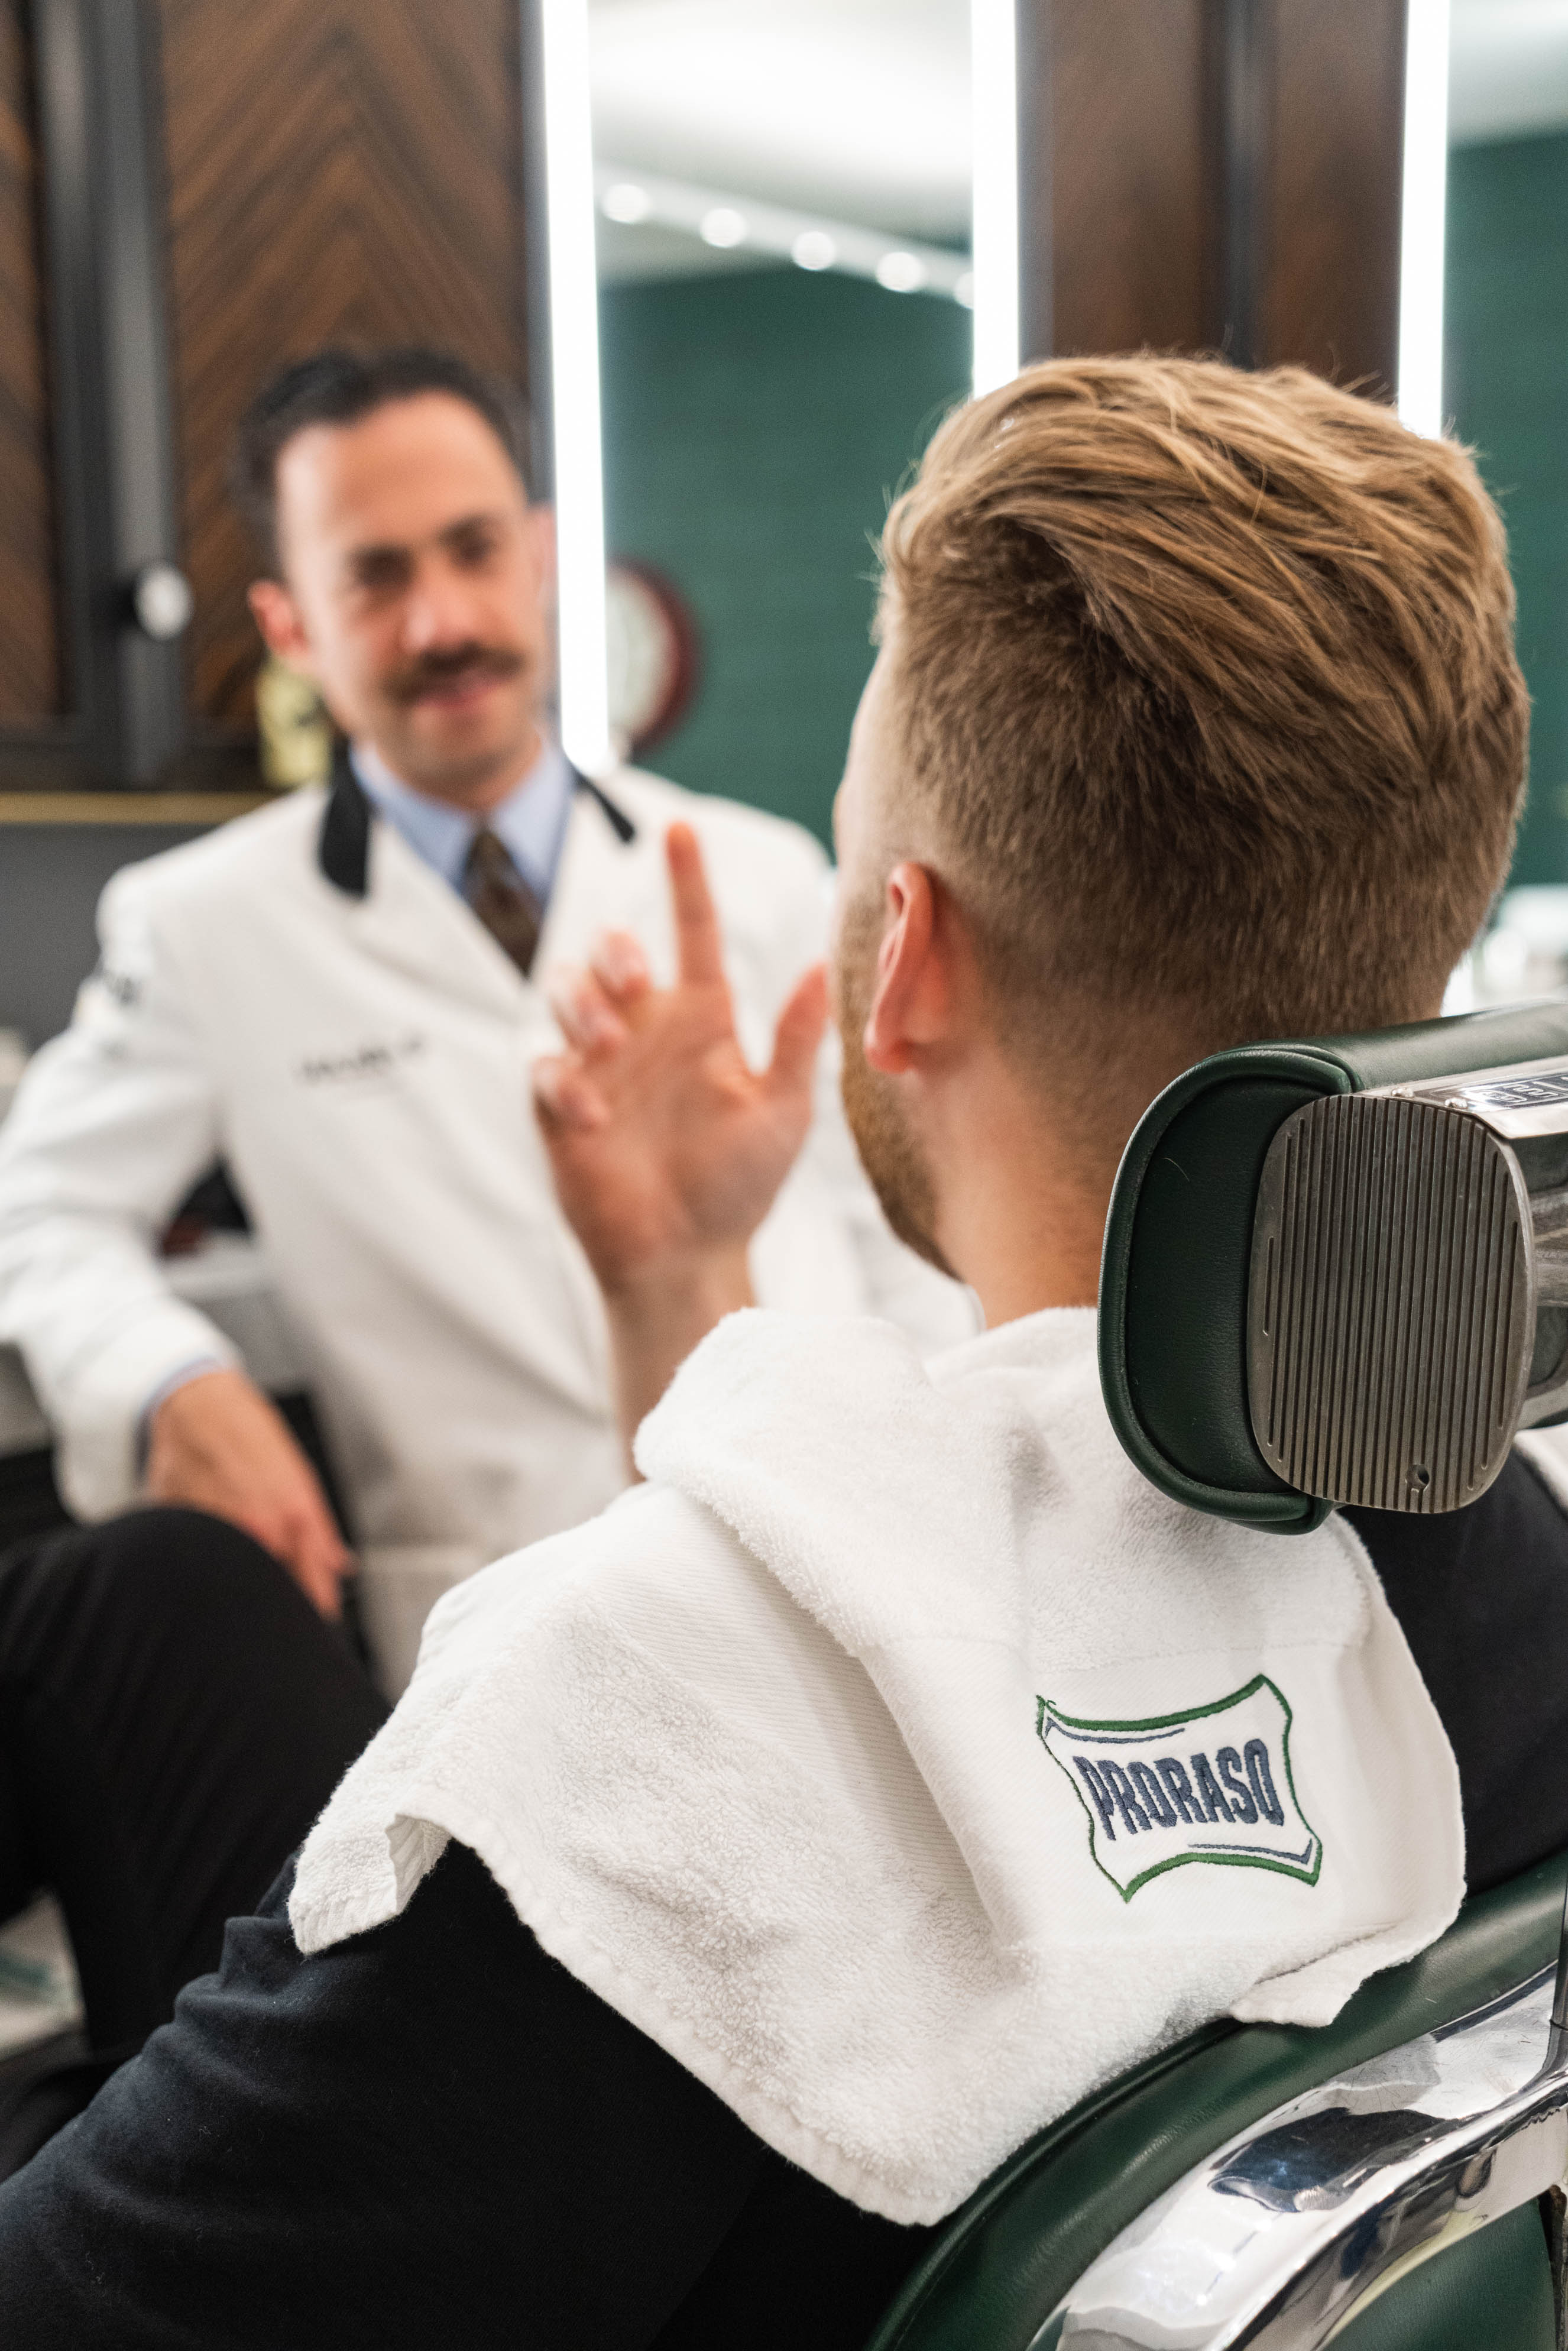 Man getting shaving instruction sitting in a barber chair from Proraso Master Barber Michael Haar.